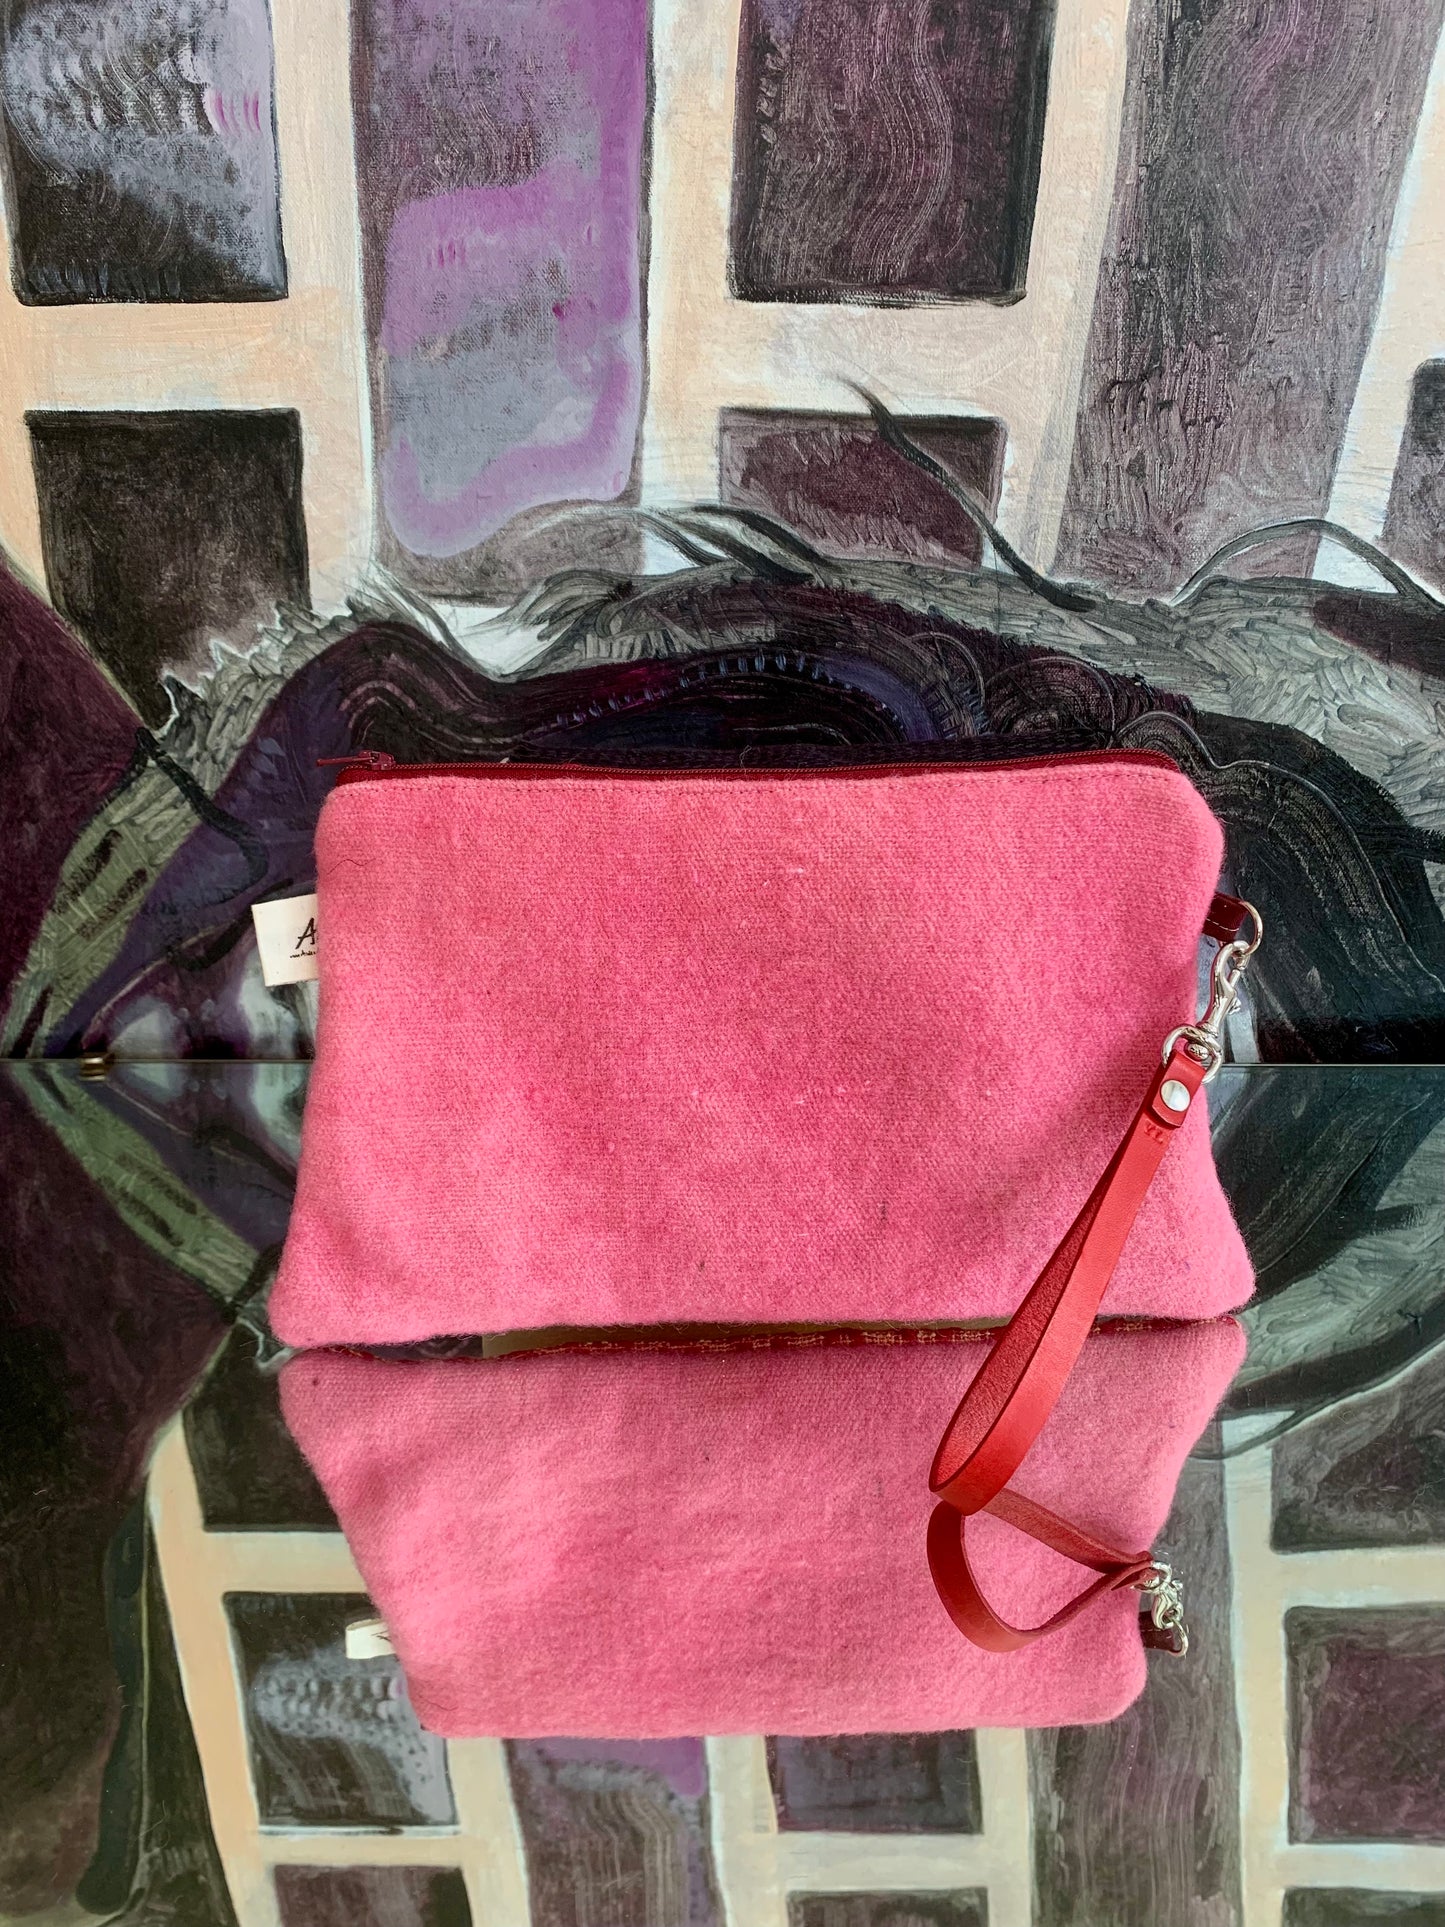 Zipper Clutch: pink and red overshot-with red leather wristlet